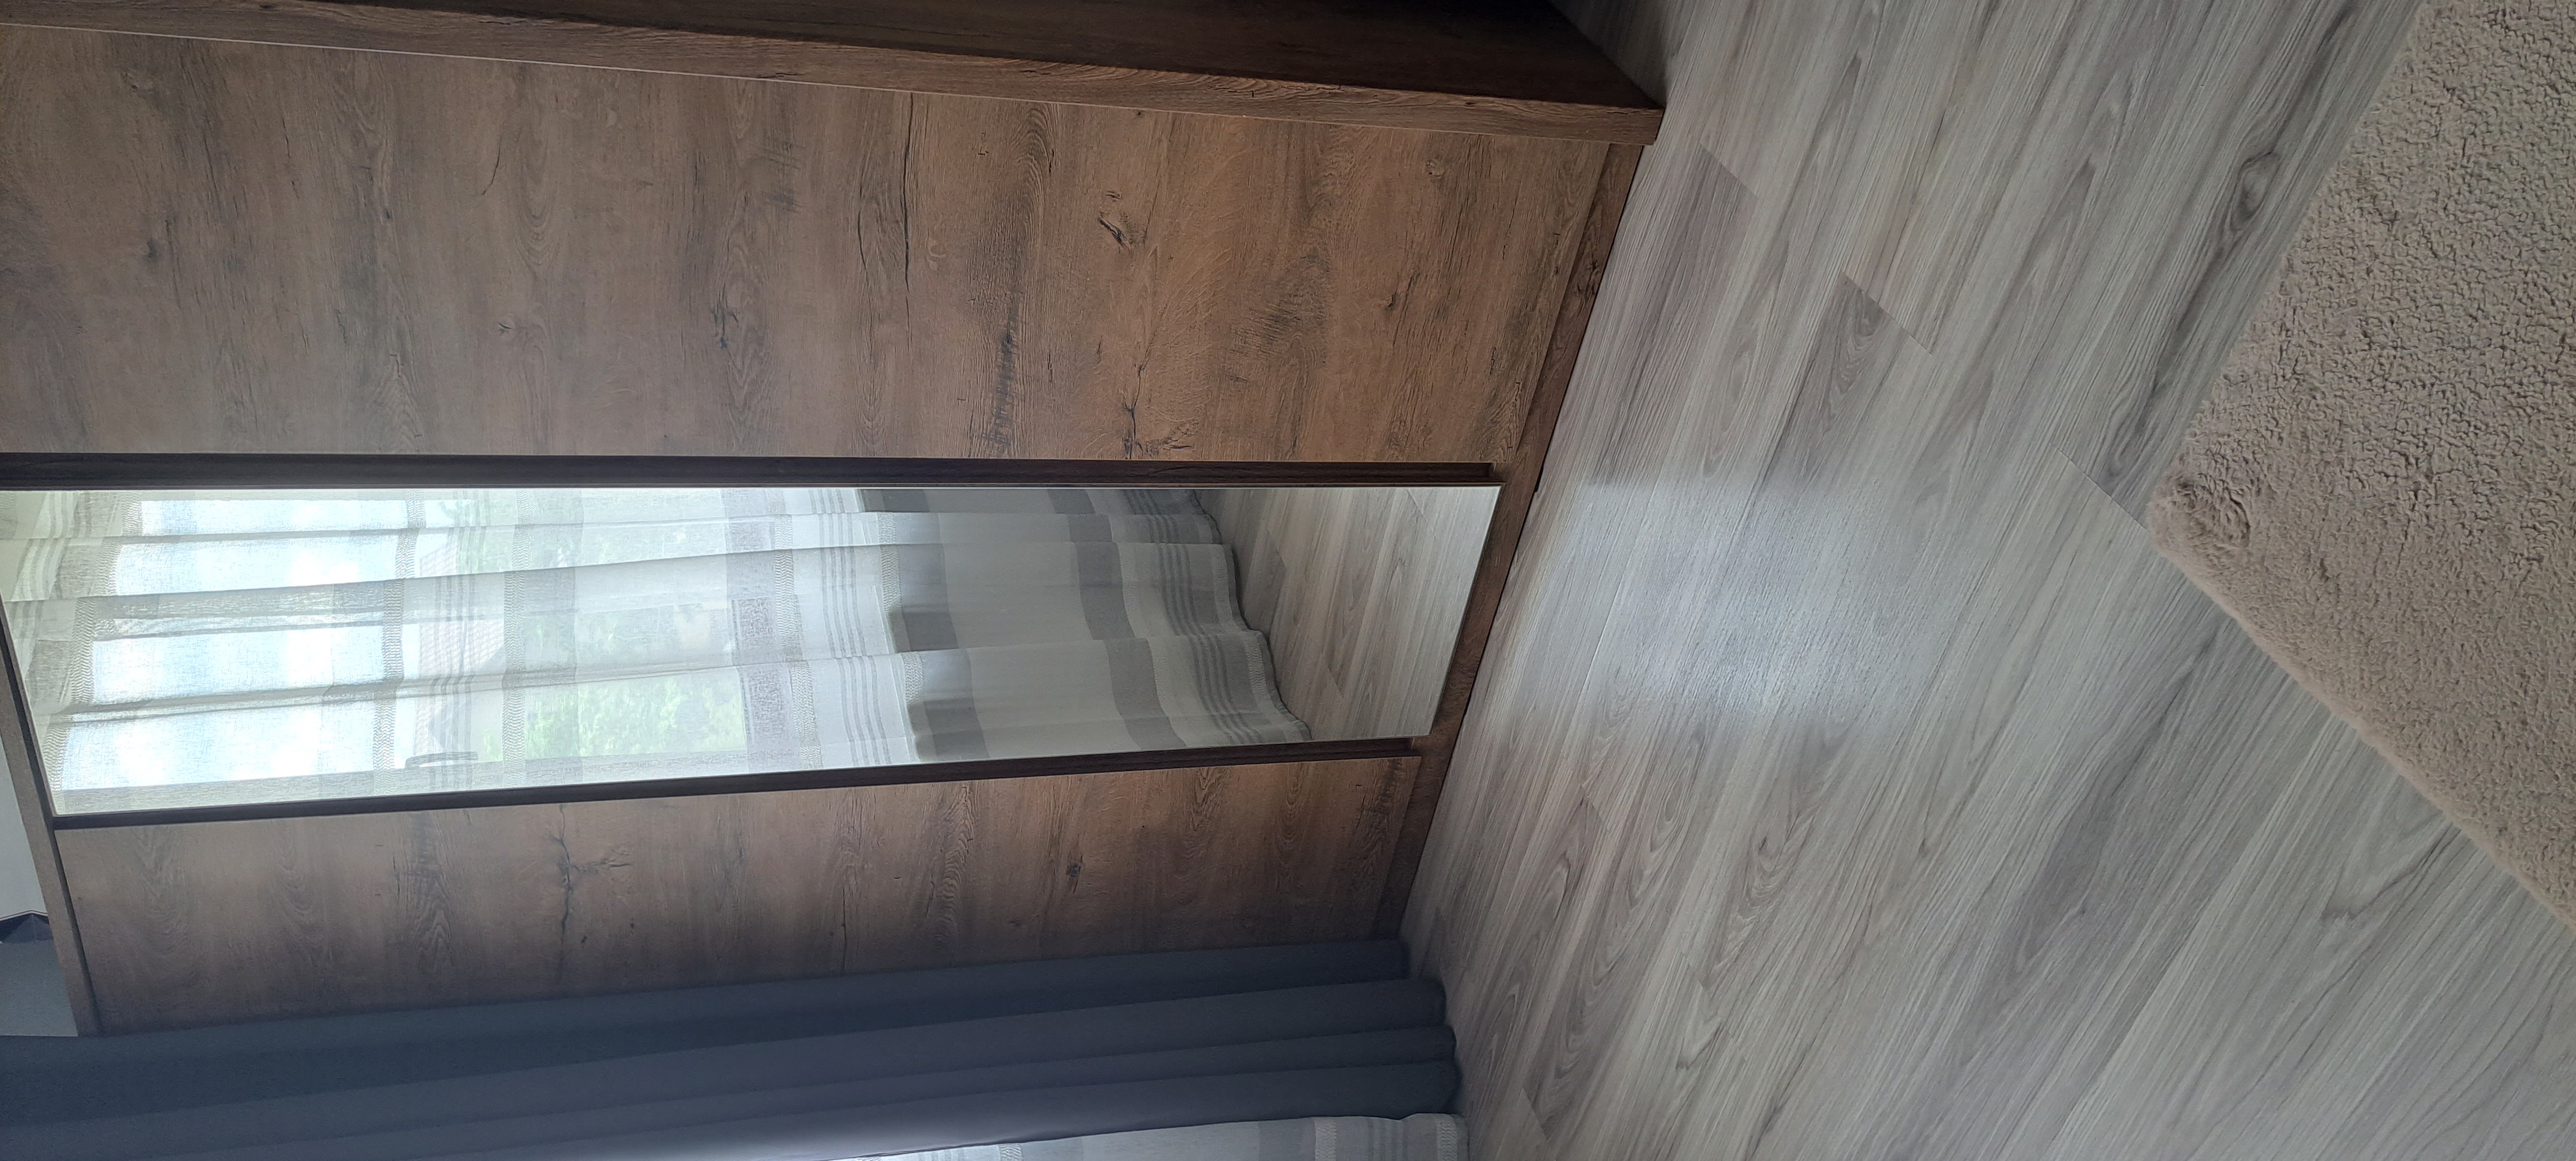 Hello !
I need 4 shelves for the Vedde model (166×197×53).
We moved and they got lost/forgotten ...